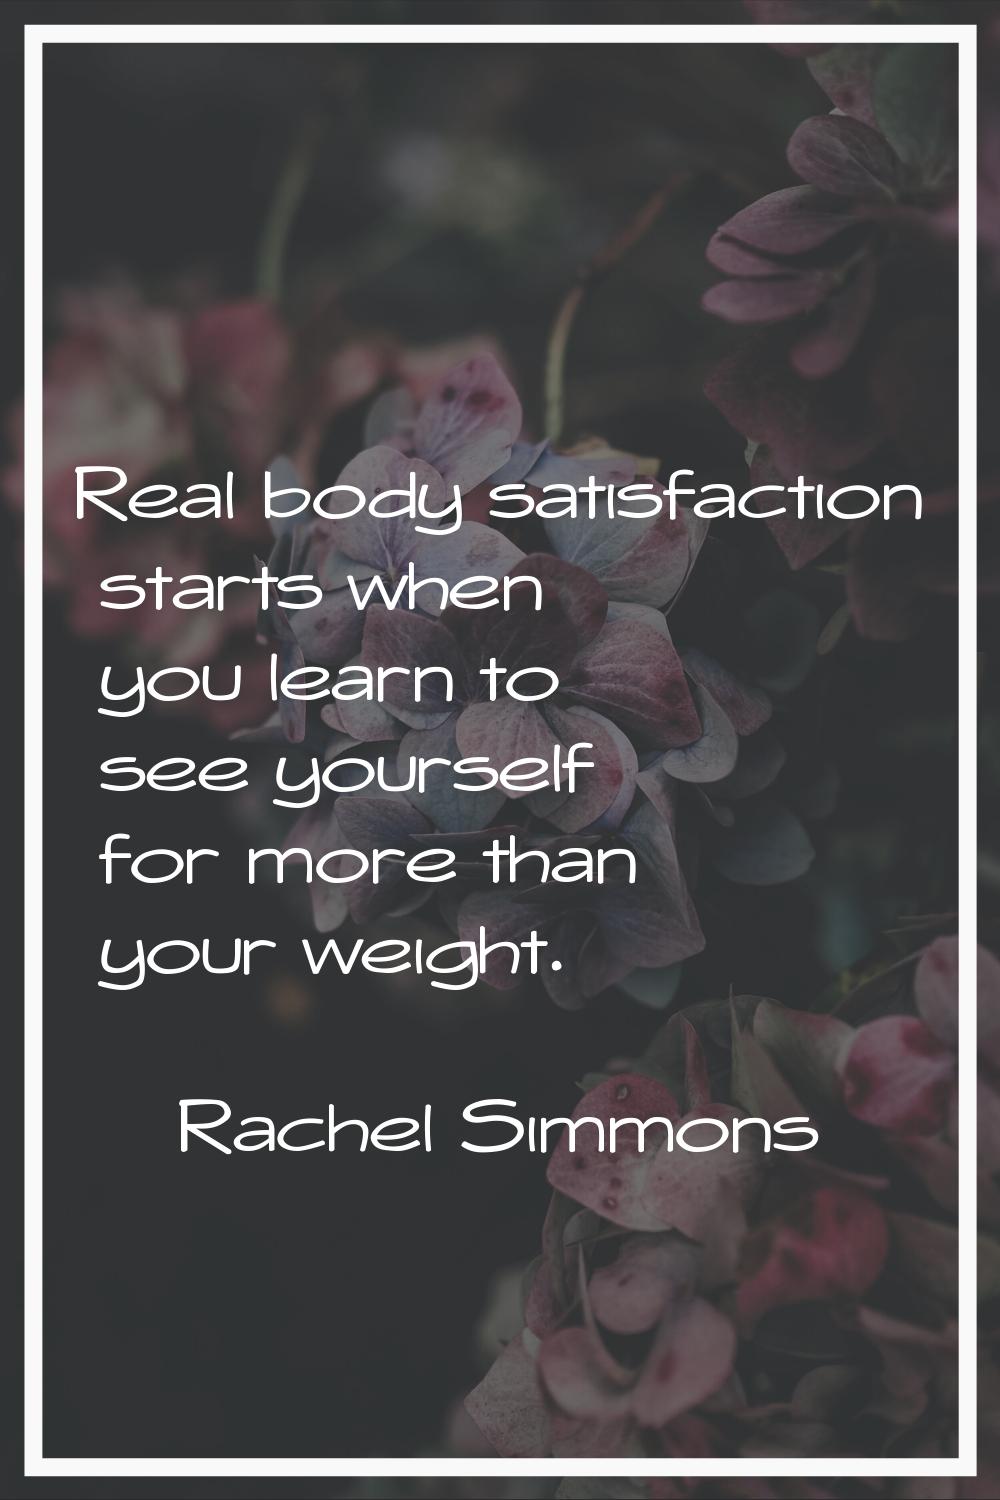 Real body satisfaction starts when you learn to see yourself for more than your weight.